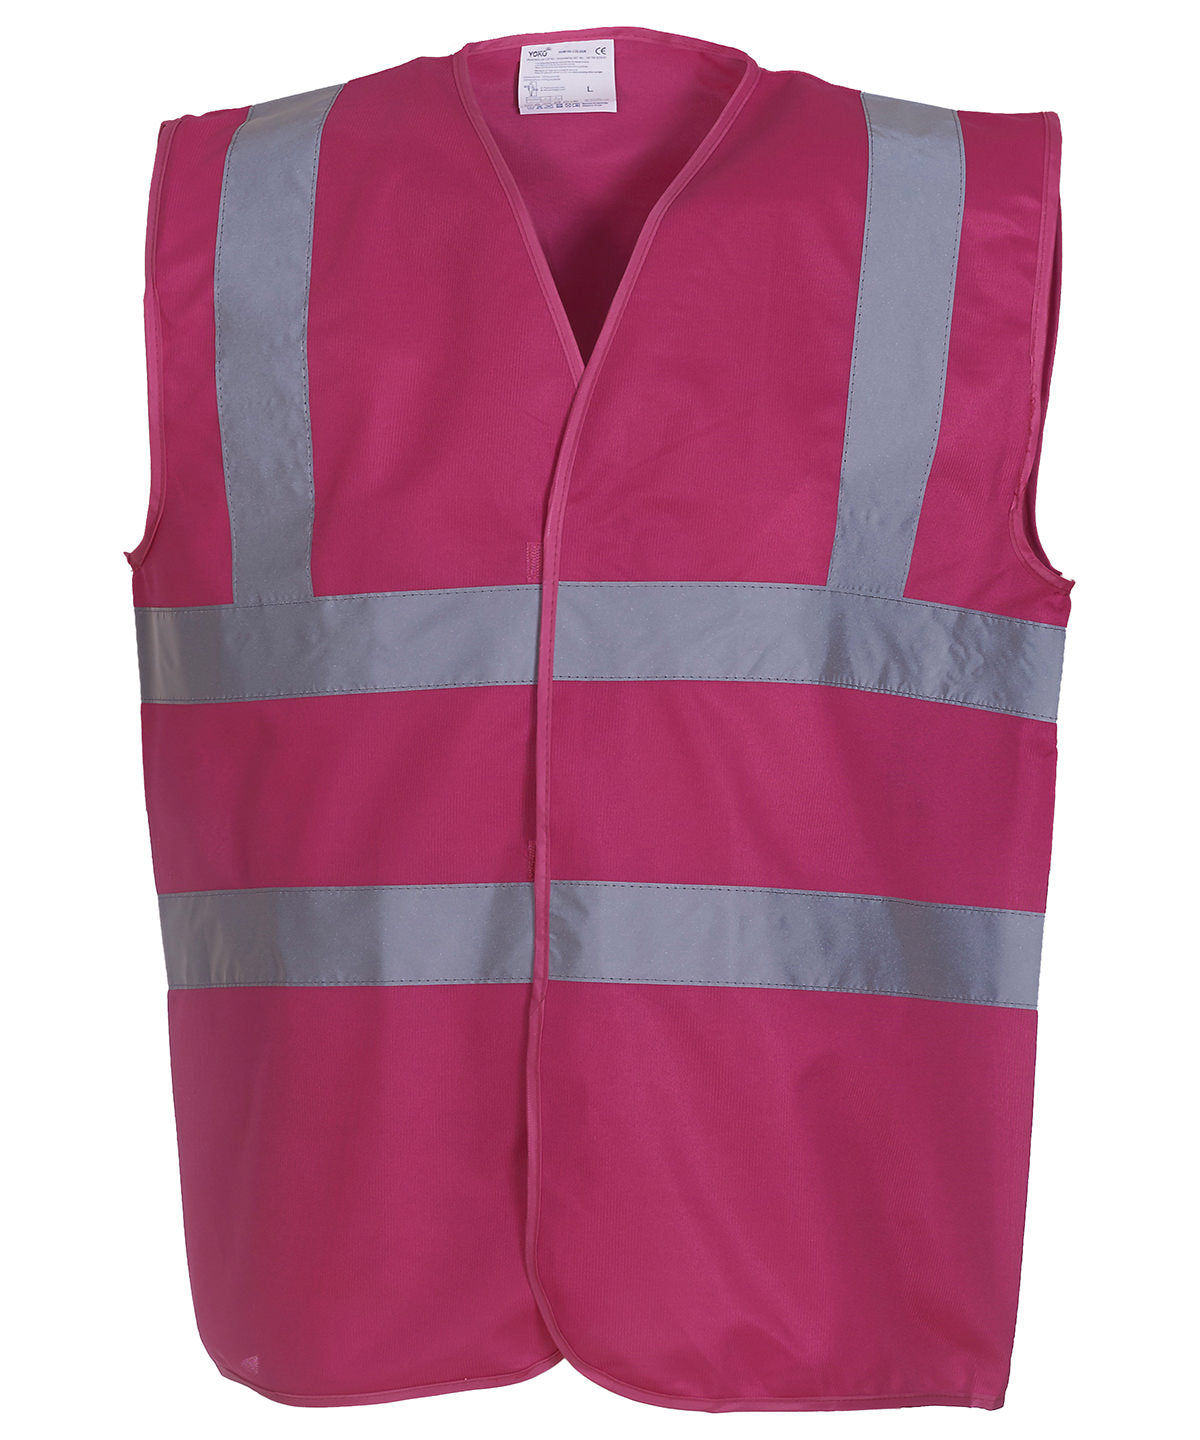 Personalised Safety Vests - Mid Red Yoko Hi-vis 2-band-and-braces waistcoat (HVW100)